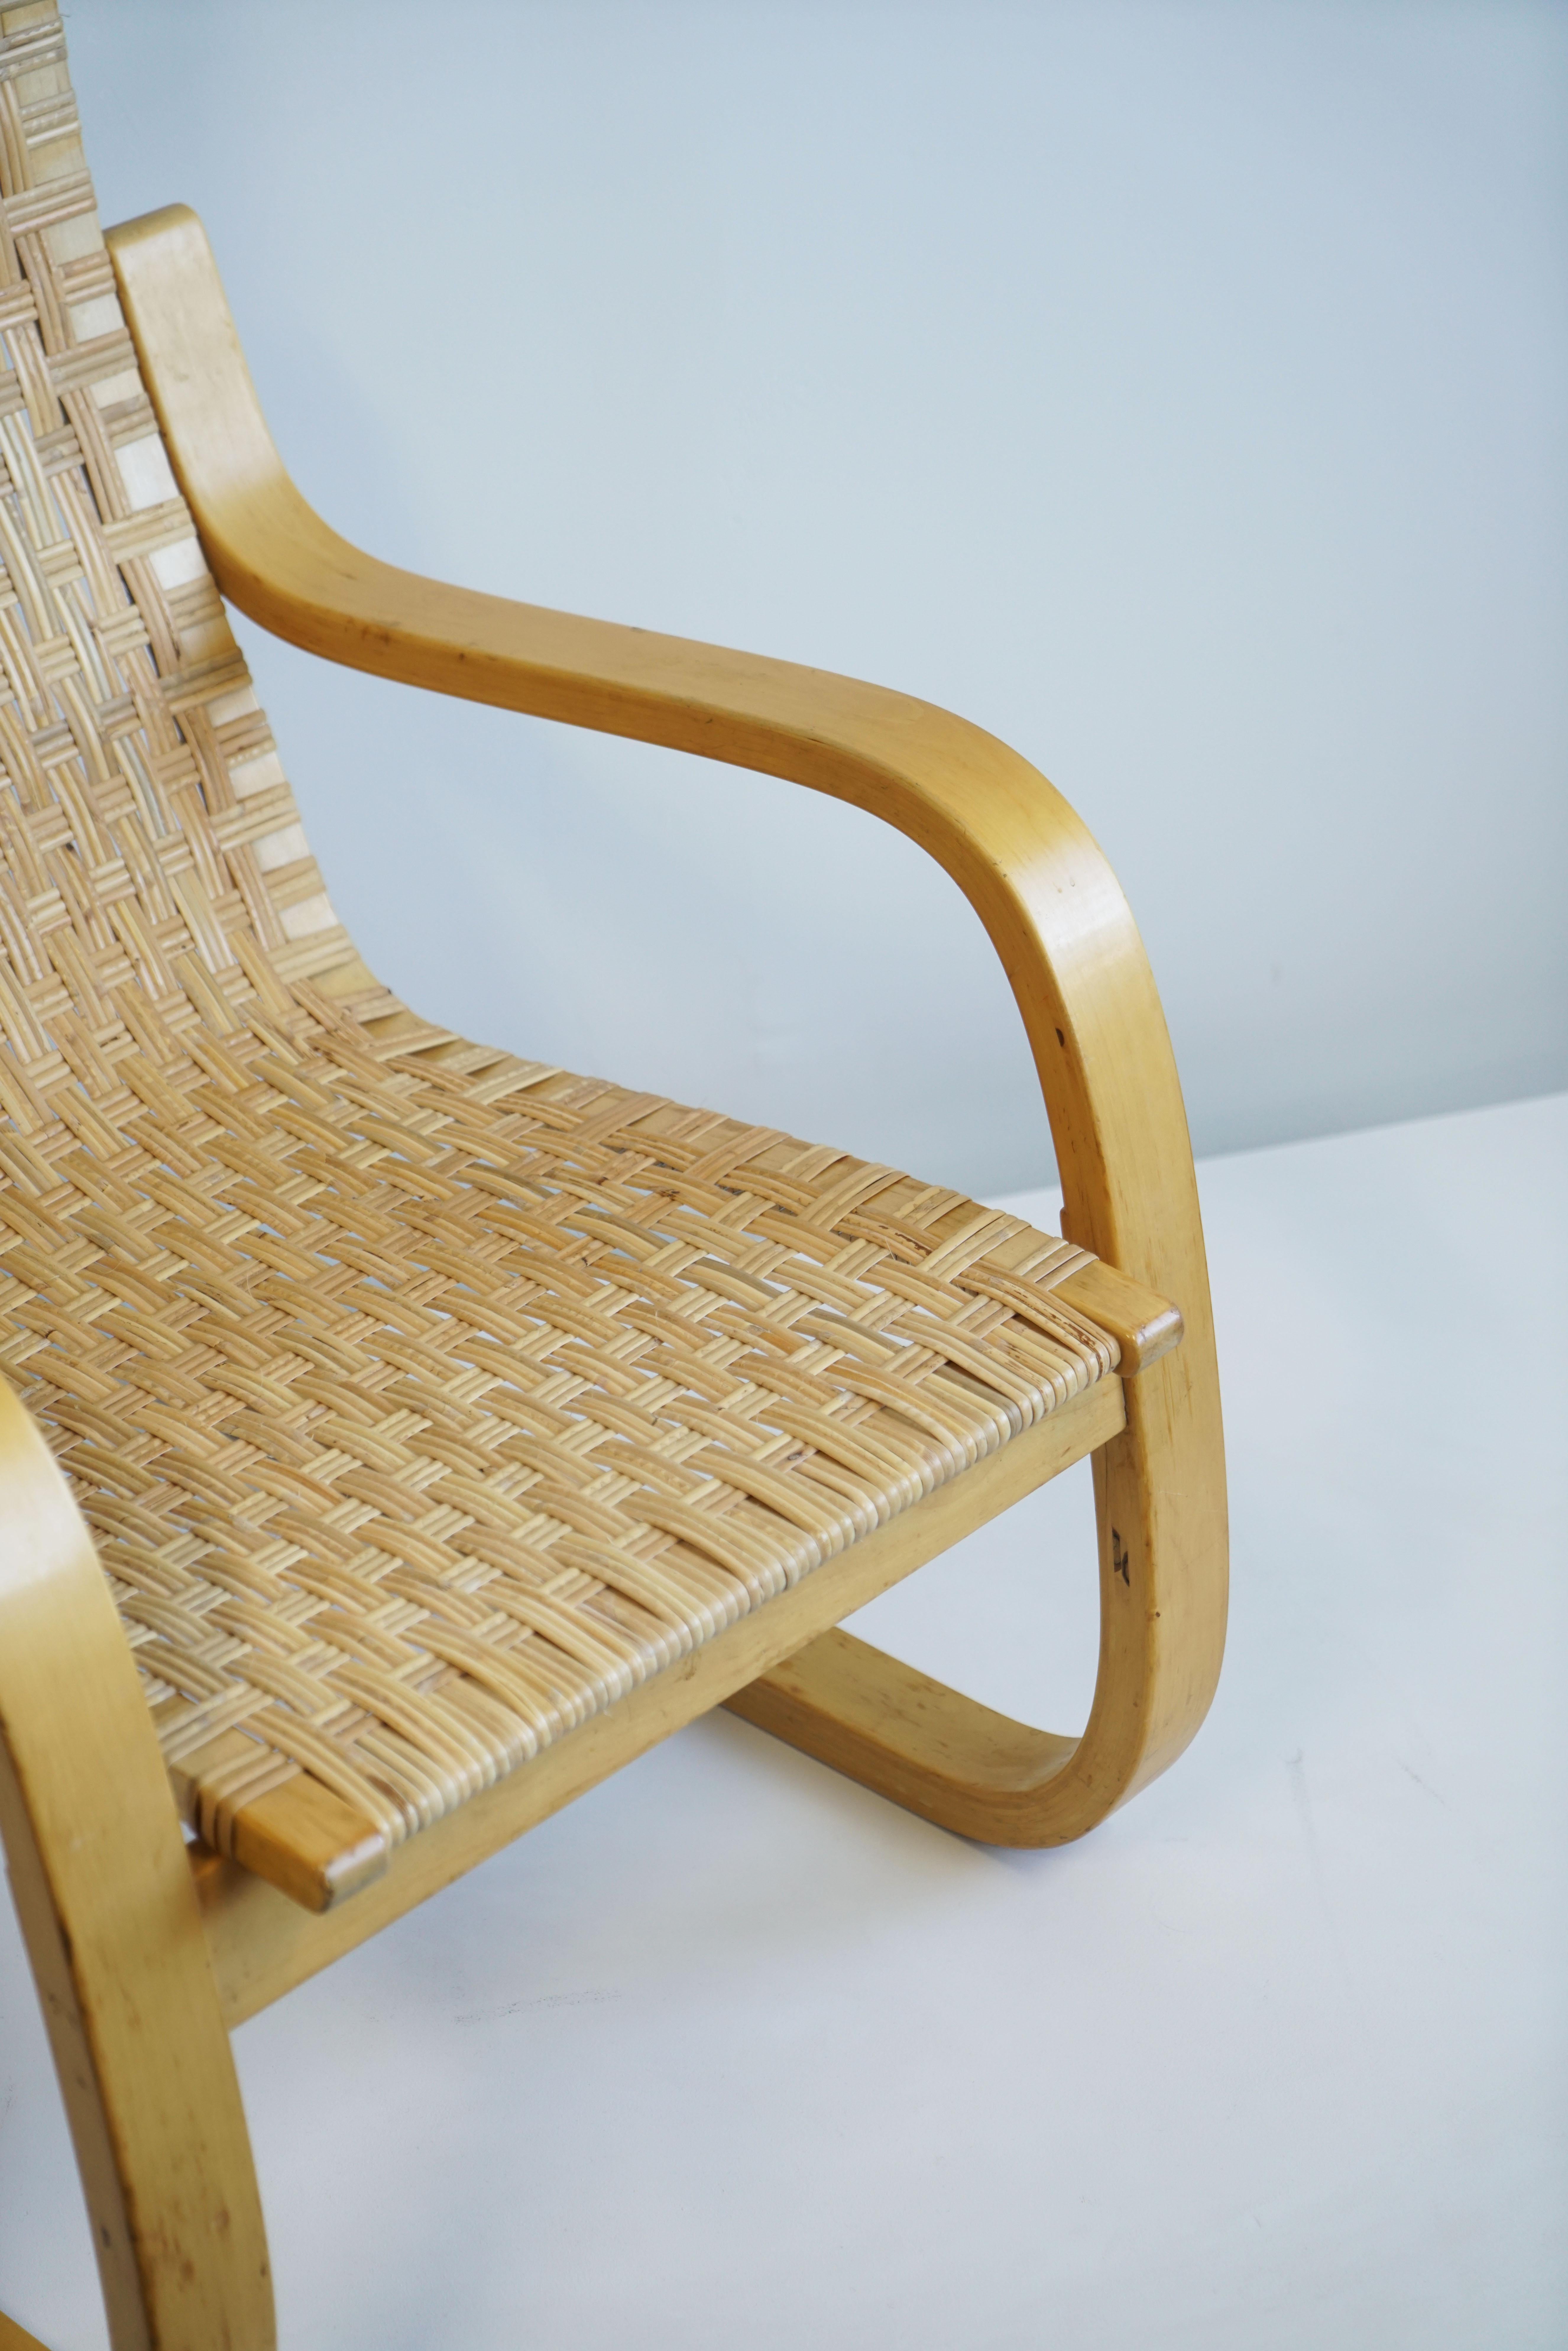 1960 Alvar Aalto Cantilever Chair Model 406 by Artek in Birch and Cane Webbing In Good Condition For Sale In Chicago, IL